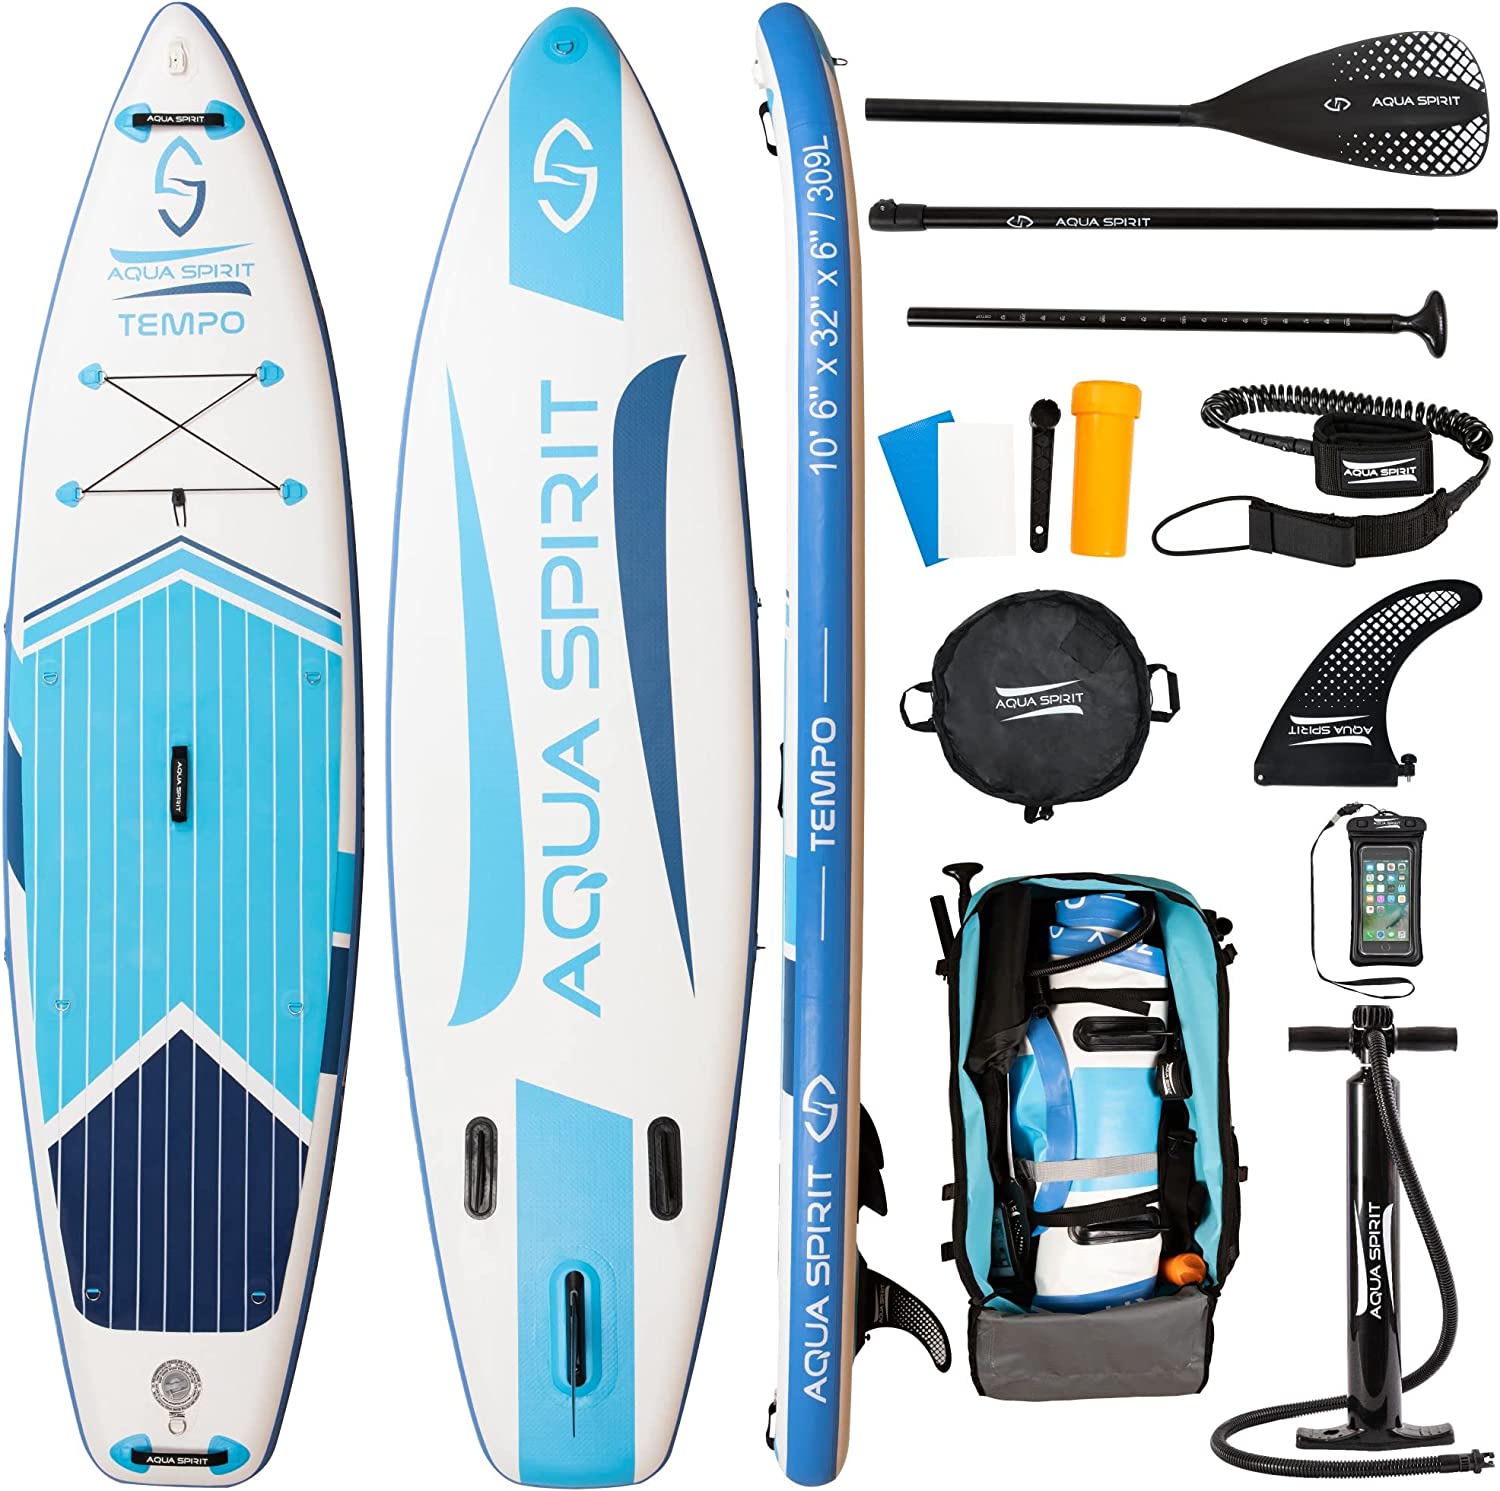 Aqua Spirit Tempo 10' Isup Inflatable Stand Up Paddle Board For Adult Beginners/intermediate With Backpack, Leash, Paddle, Changing Mat & Waterproof Phone Case, All-Inclusive Package, 3-Years Of Complete Brand Warranty - Aqua Spirit iSUPs